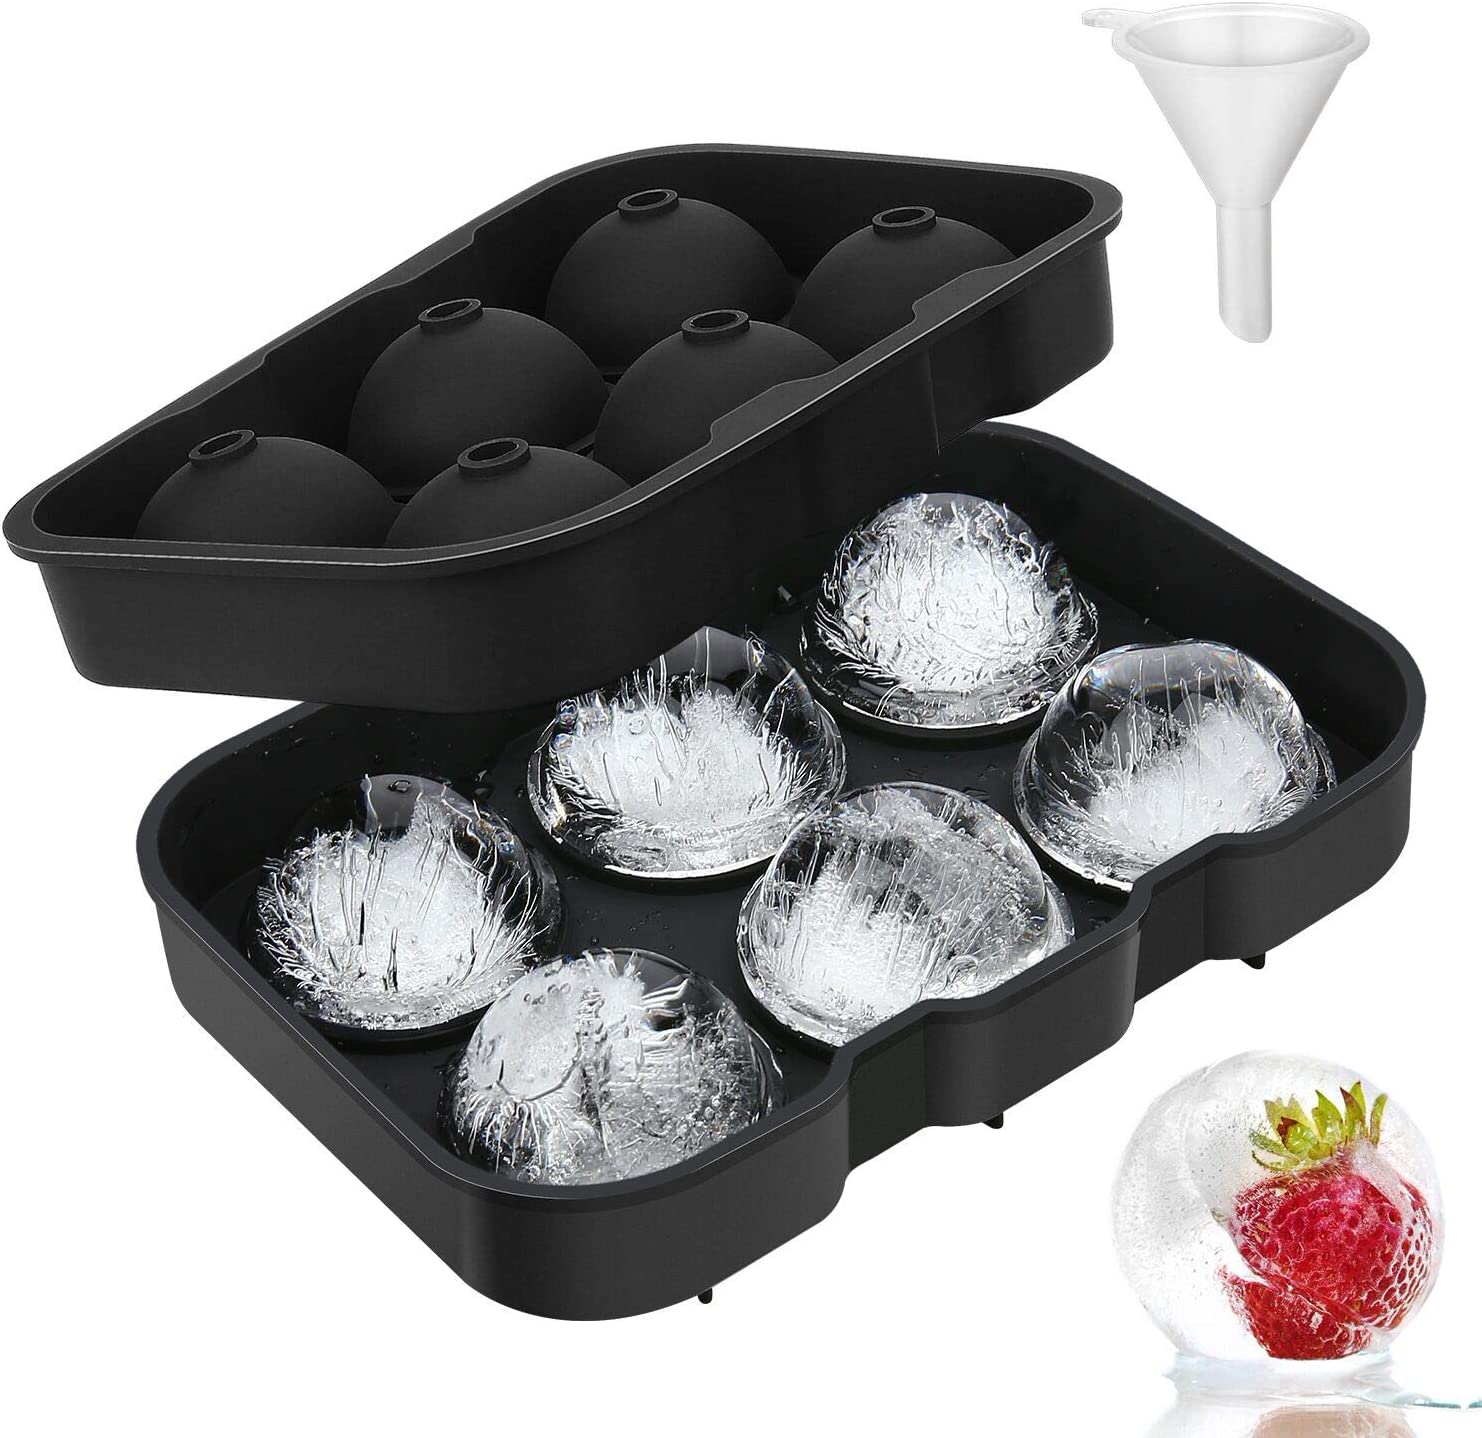 “Upgrade your icy experience with the Versatile Silicone Ice Cube Tray with Lid and Trash”